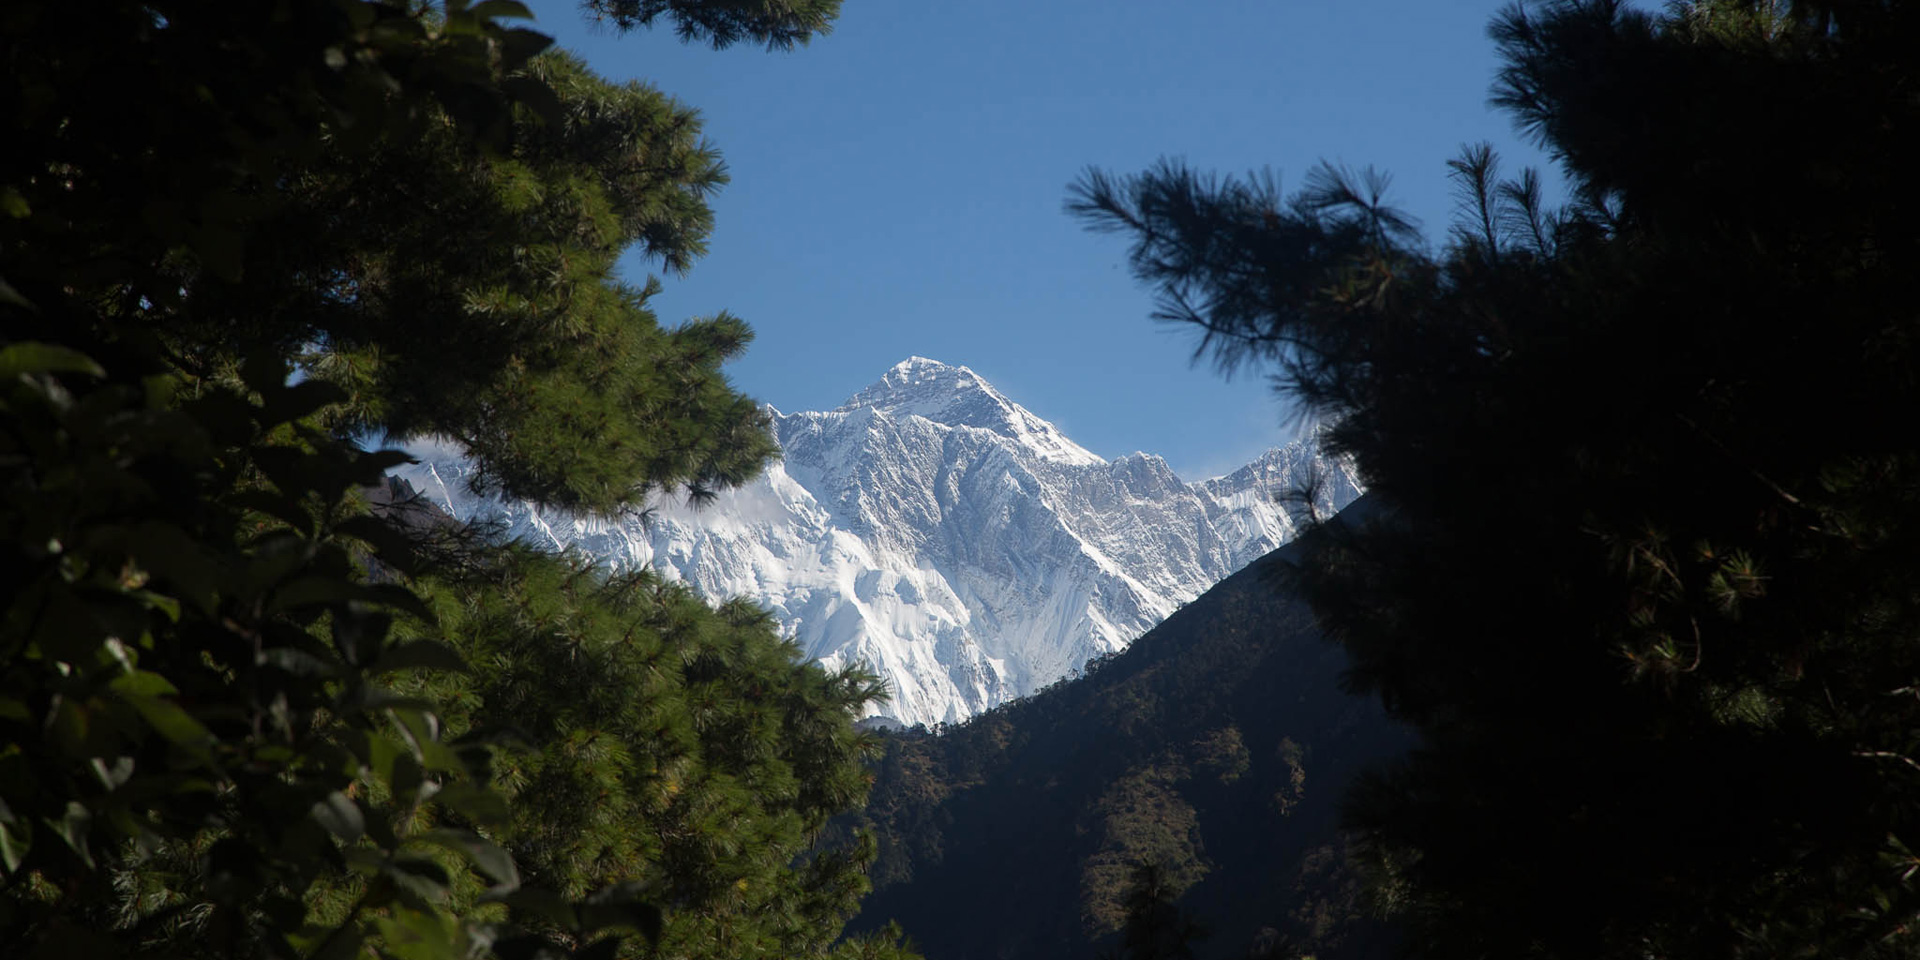 Mount Everest seen from the trail up to Namche Bazaar in Khumbu region of Nepal